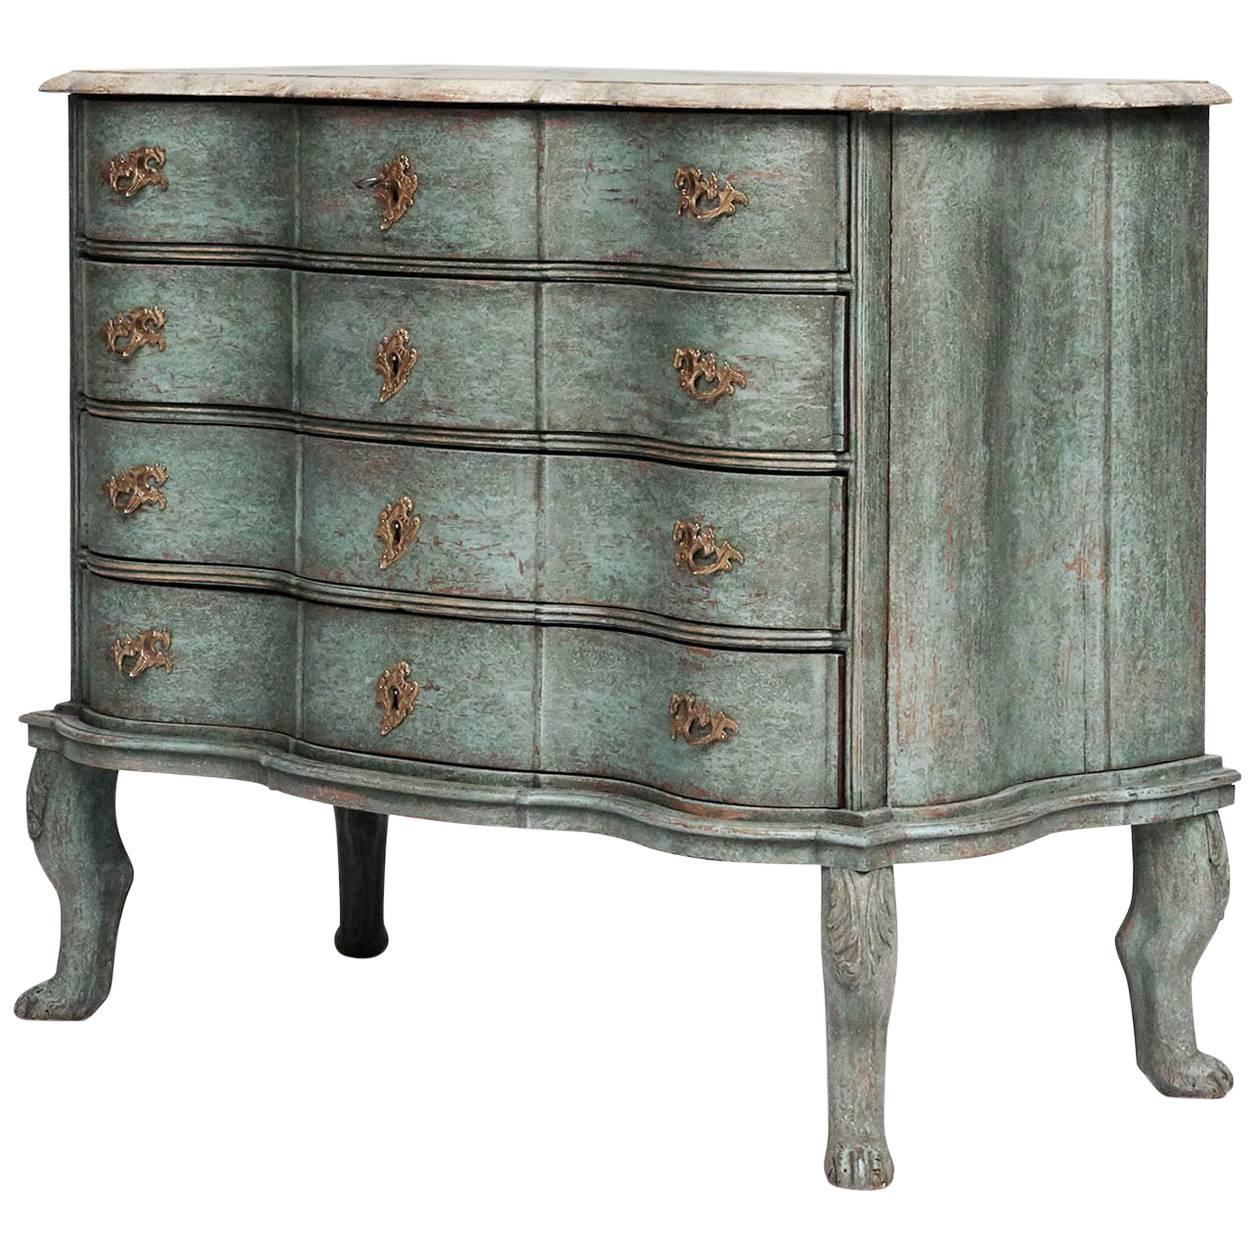 Rare Danish Baroque Painted "Blomsneider" Commode, Mid-18th Century